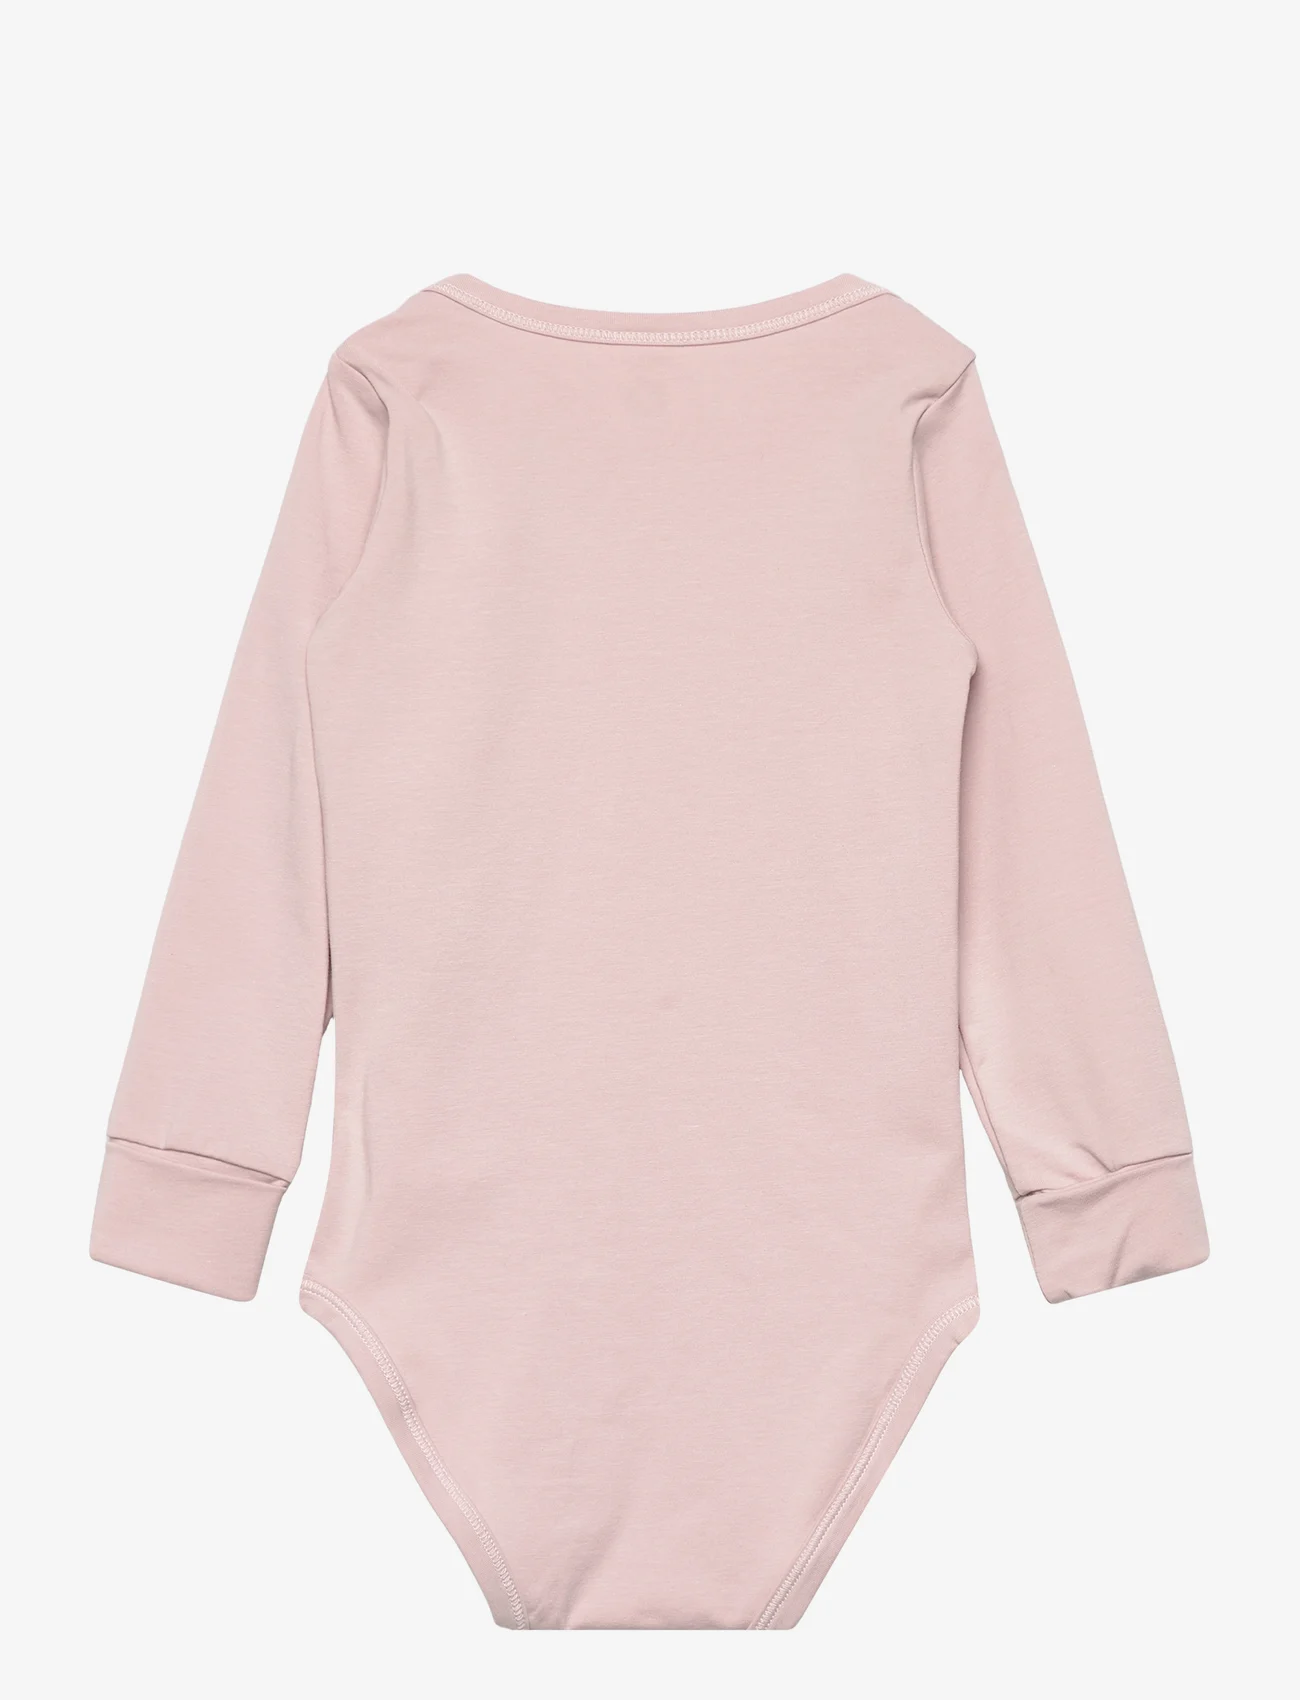 Müsli by Green Cotton - Cozy me l/s body - long-sleeved - rose moon - 1